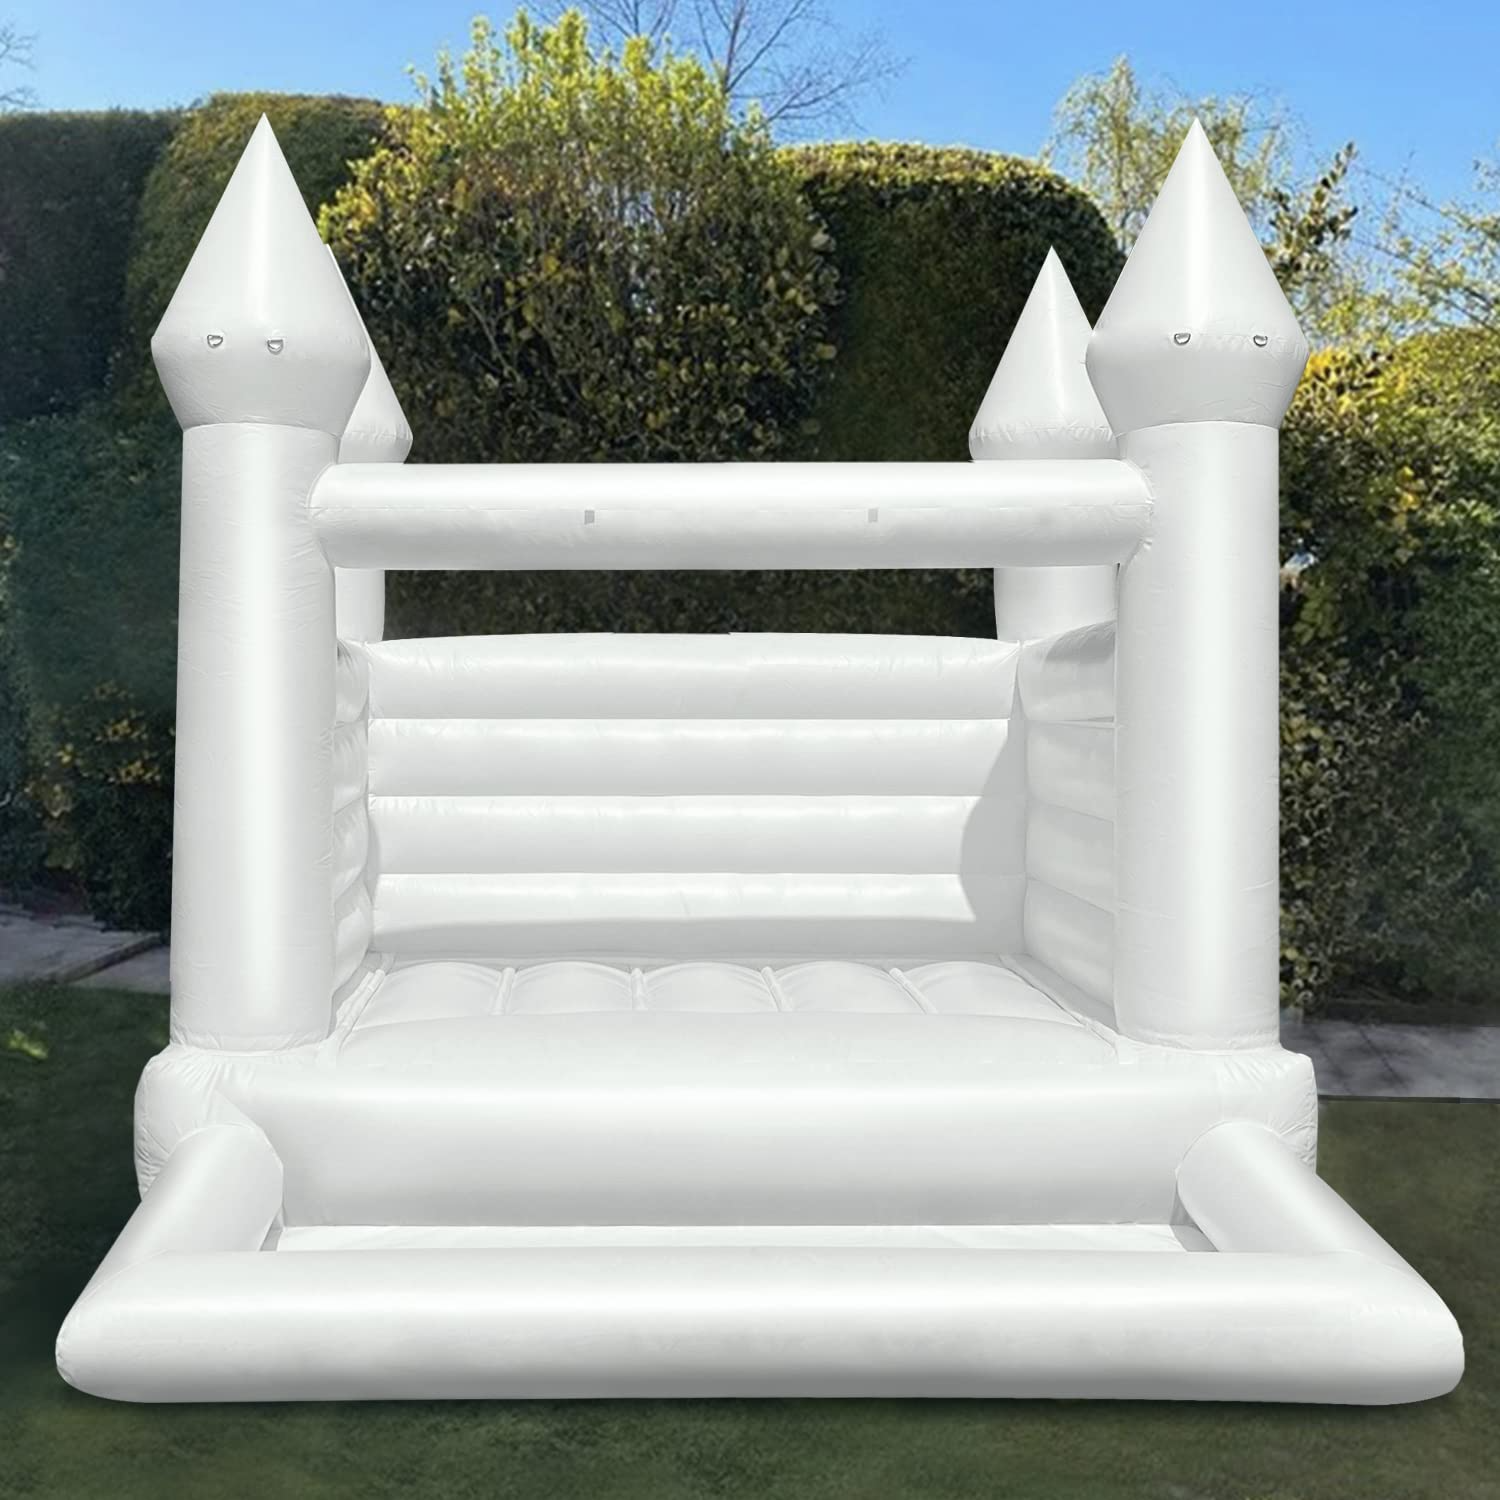 WARSUN White Bounce House 10x8x8FT / 3x2.4x2.4m with Ball Pit & Air Blower Commercial Grade All PVC Bouncy House Castle for Kids Birthday Baby Shower Business Photography